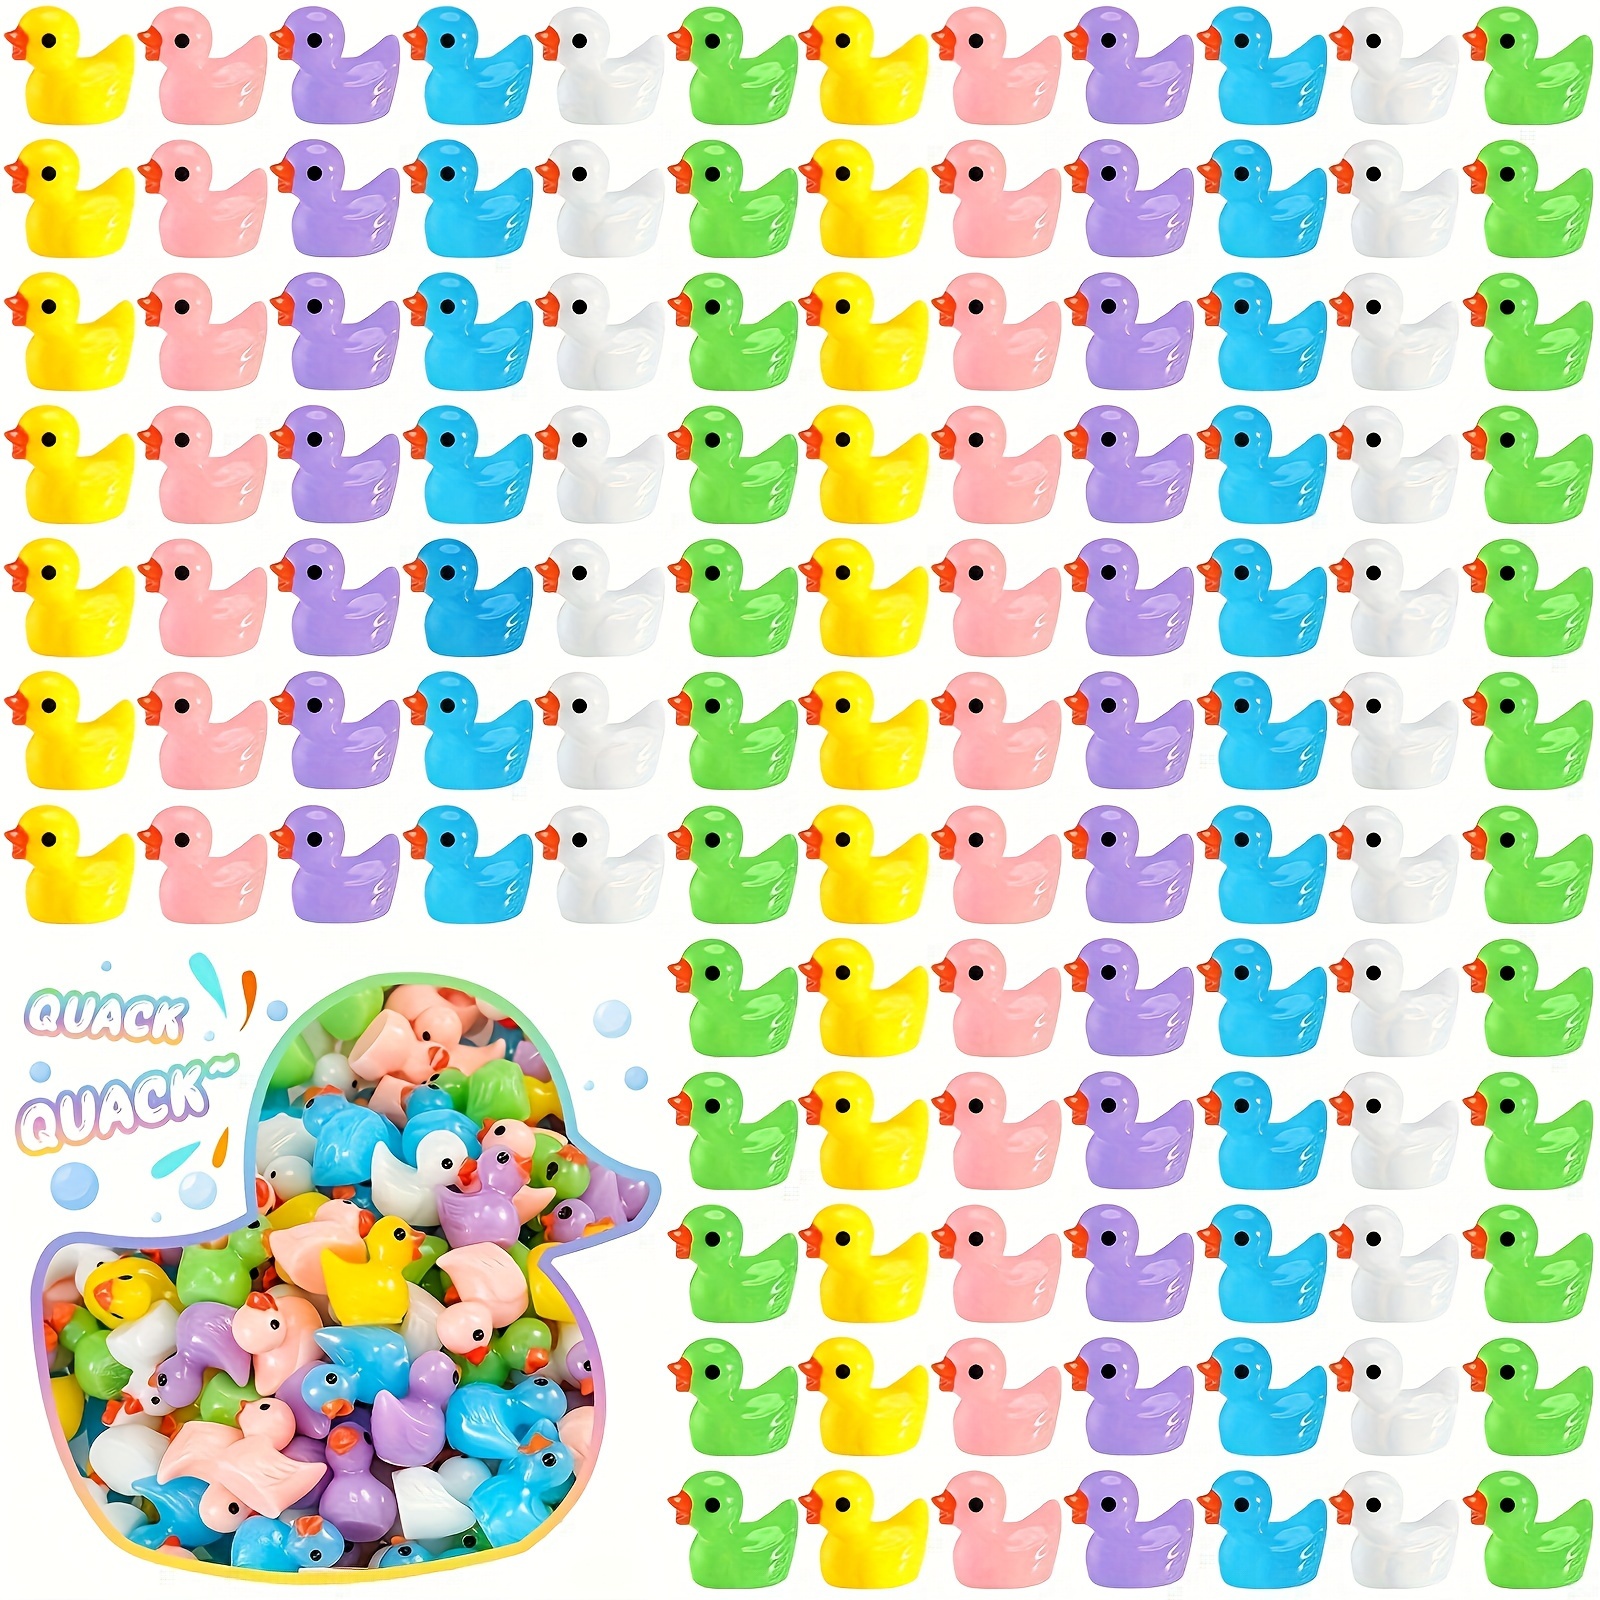 

100pcs Whimsical Mini Resin Ducks - Perfect For Micro Gardens, Aquariums & Dollhouse Decor | Quirky Office & Home Accents | Ideal Prank Gifts | Assorted Colors